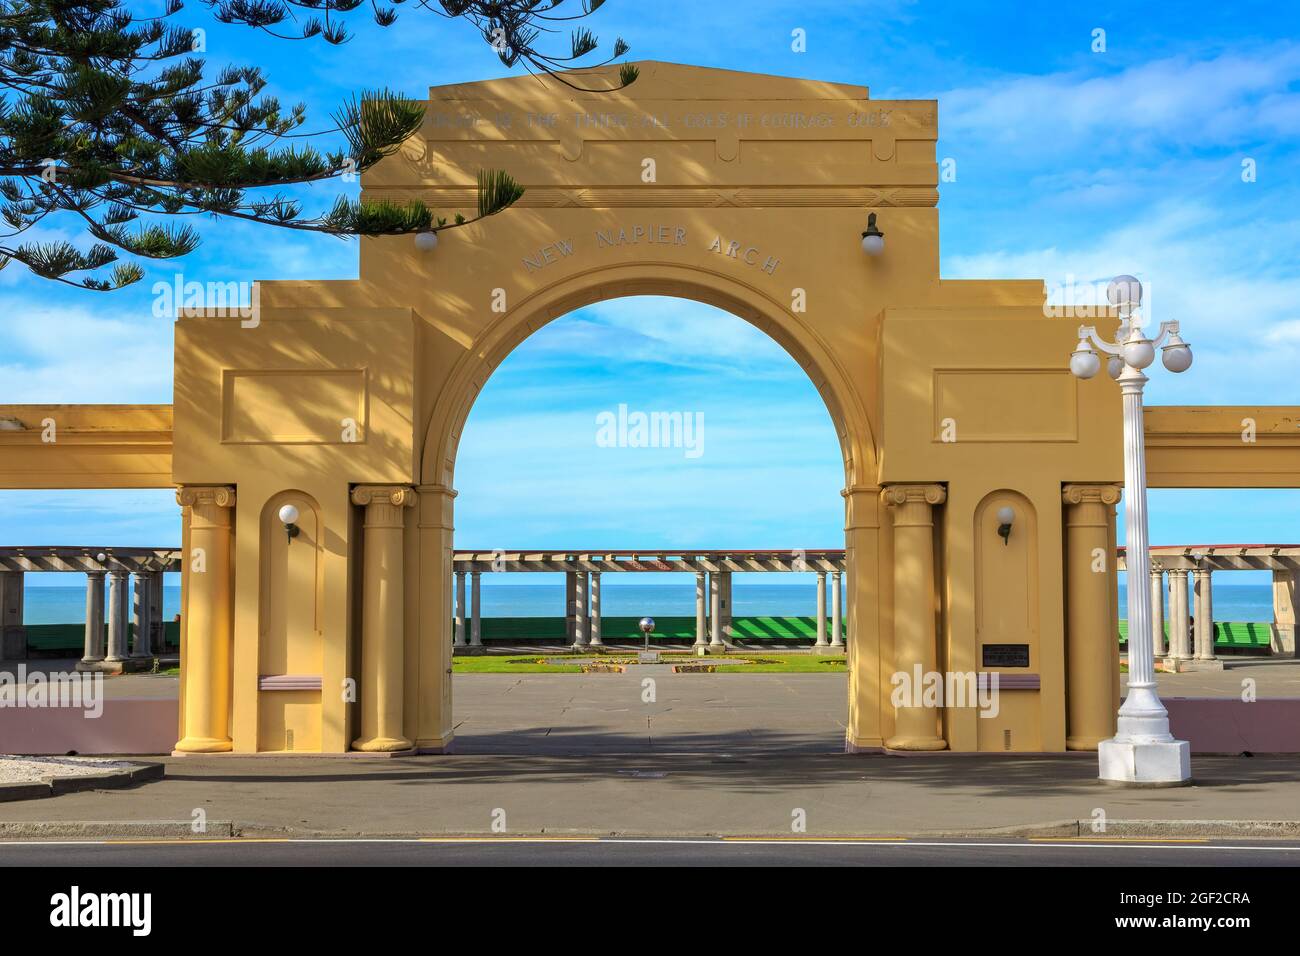 Napier, New Zealand. The New Napier Arch, erected 1937, looking out on the Veronica Sunbay and the ocean Stock Photo